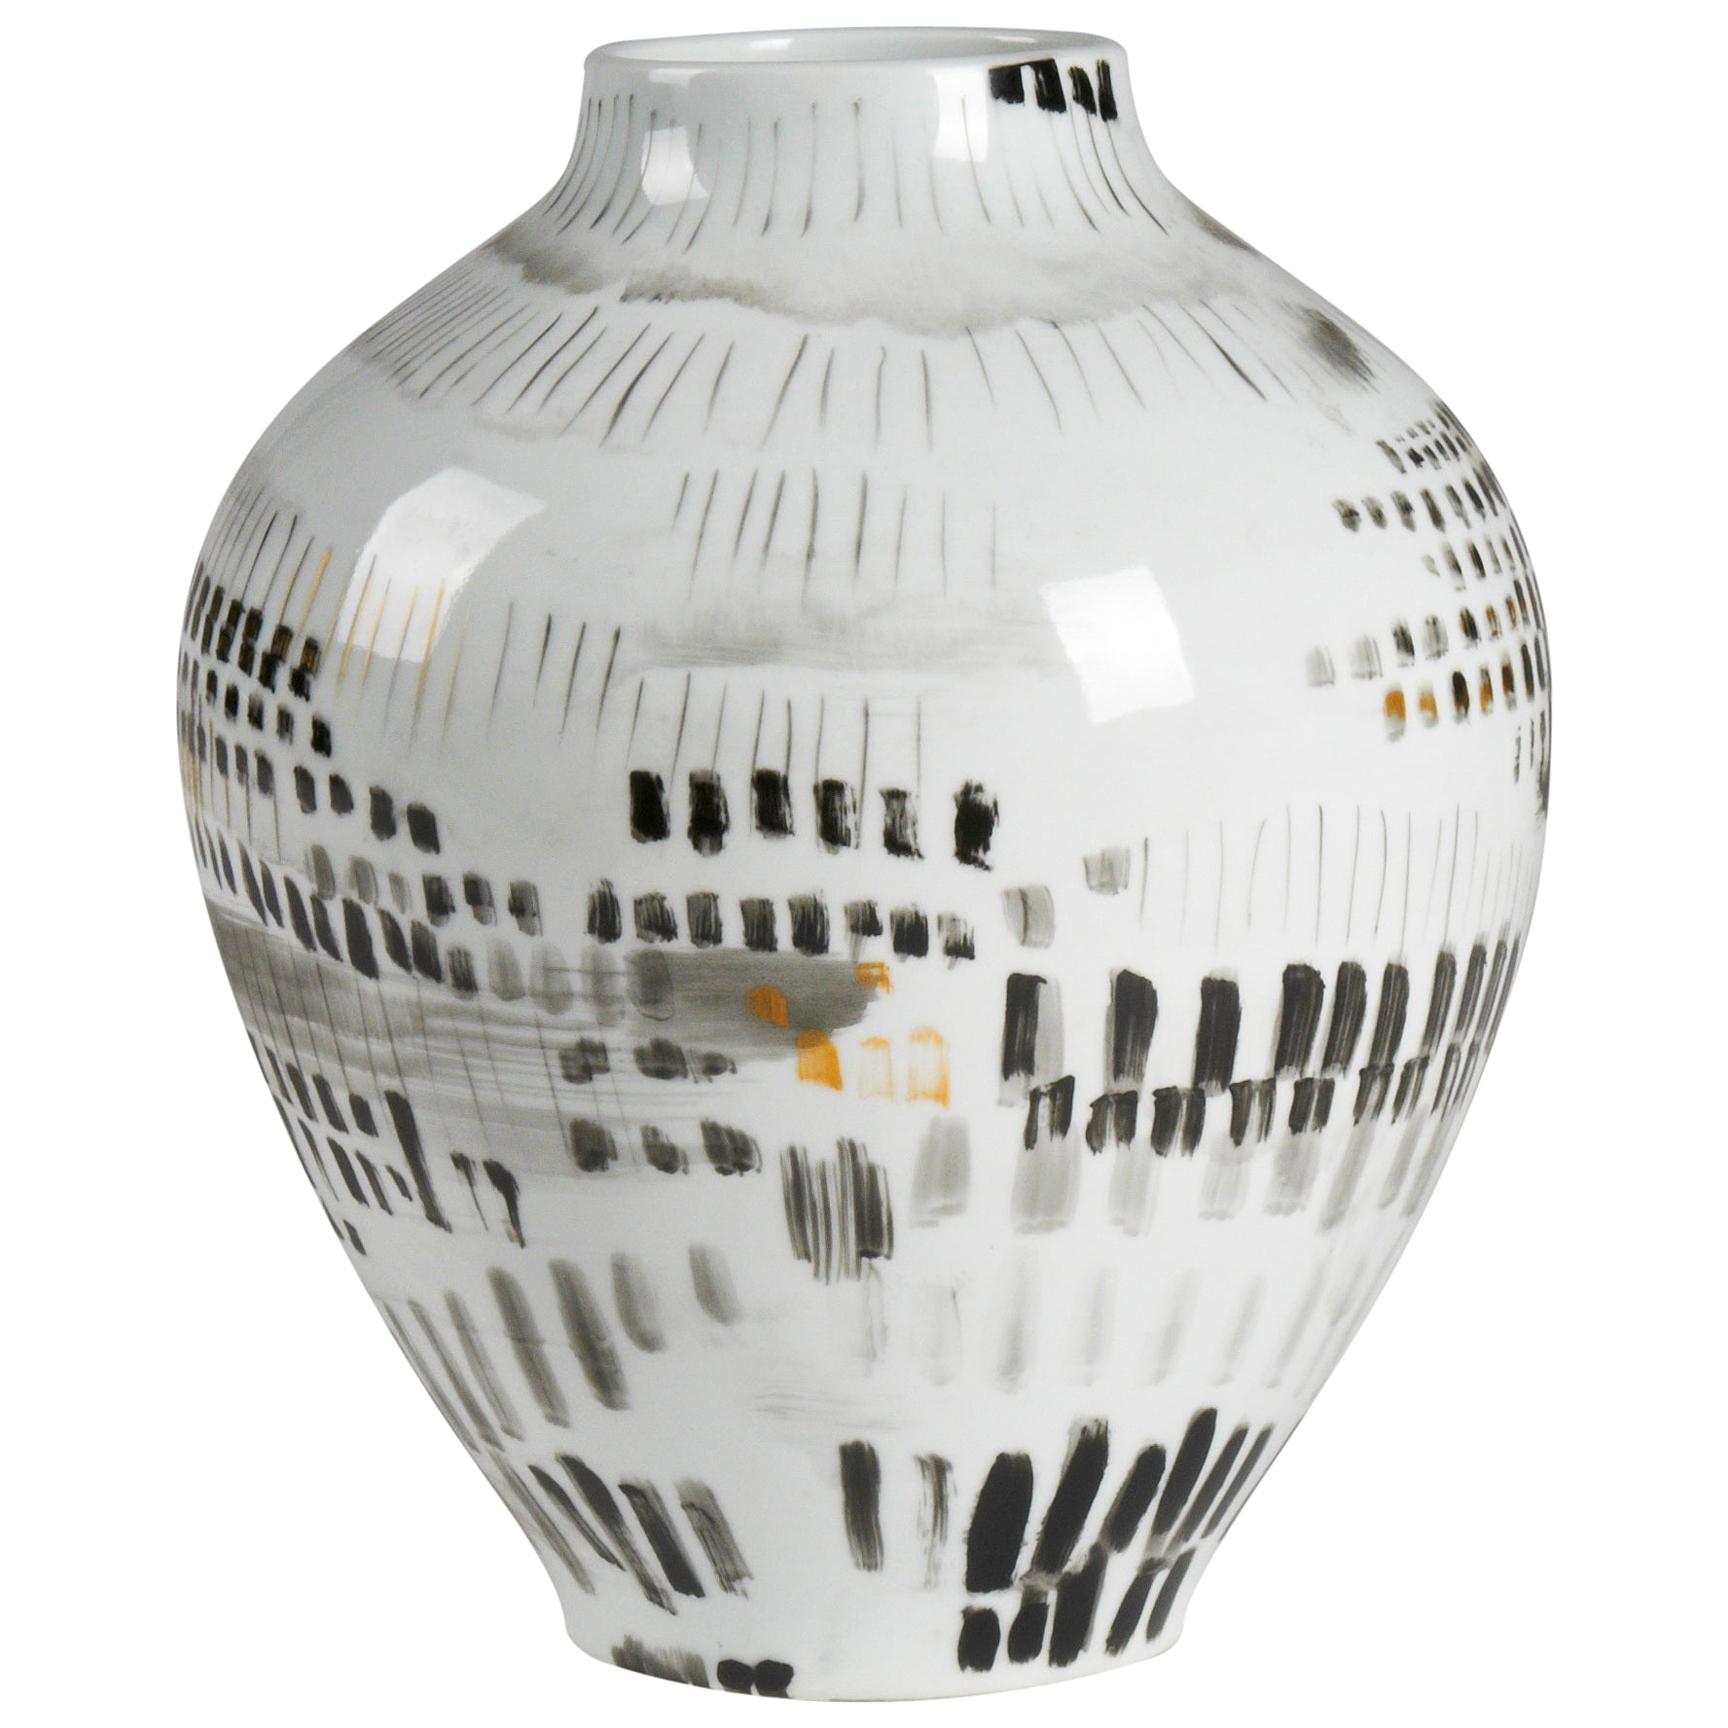 Cade Decorative Abstract Vase in Porcelain by CuratedKravet